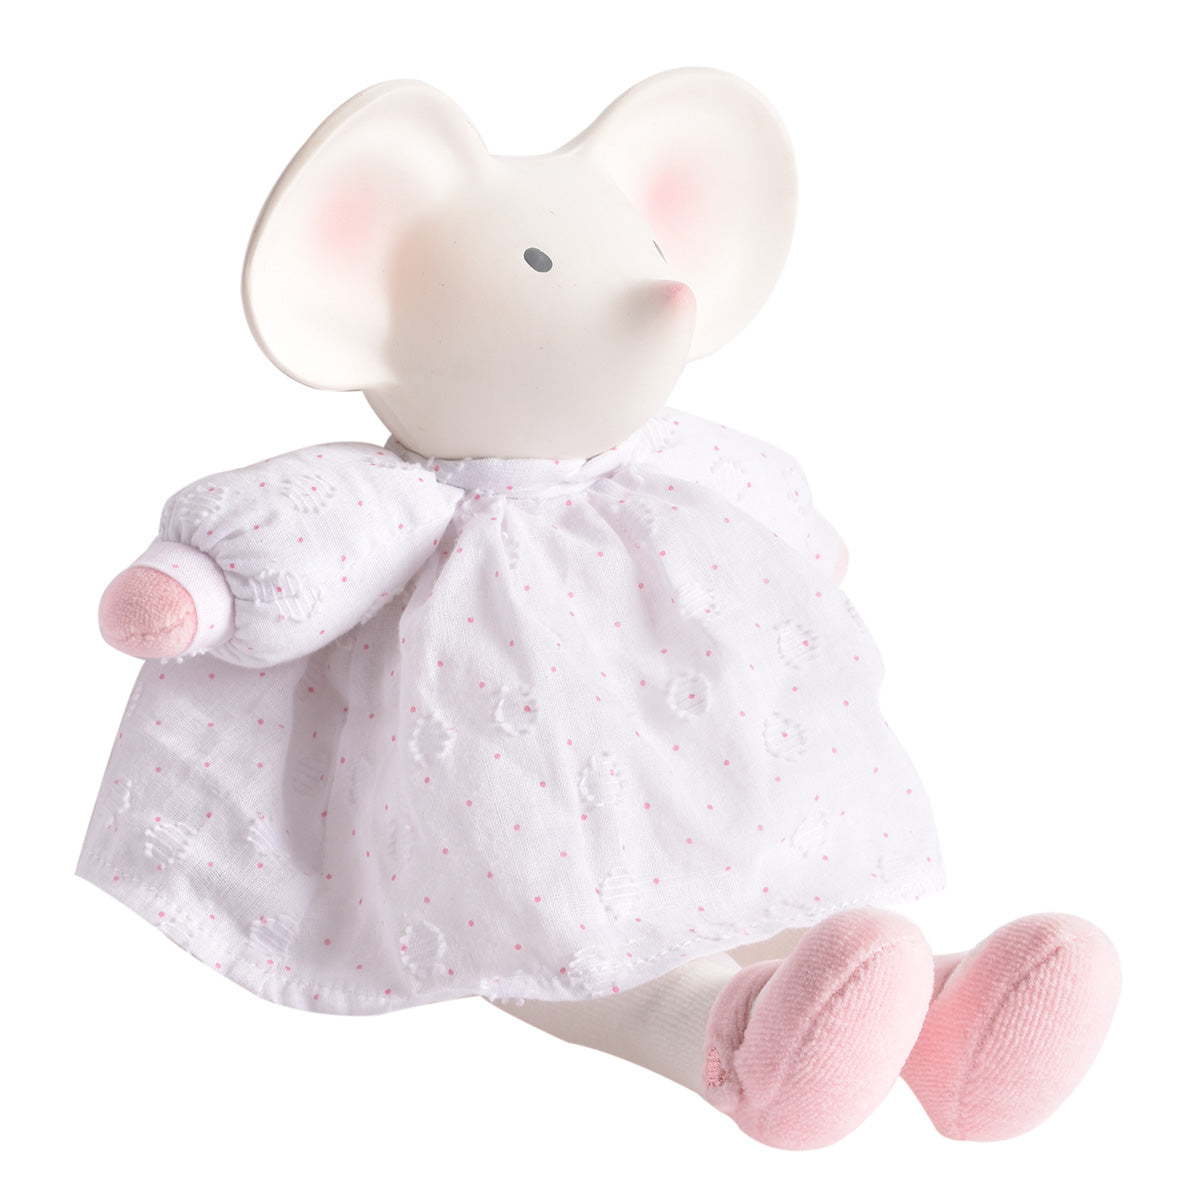 Meiya the Mouse Toy with Rubber Head in White Dress Baby Accessories Tikiri Toys   